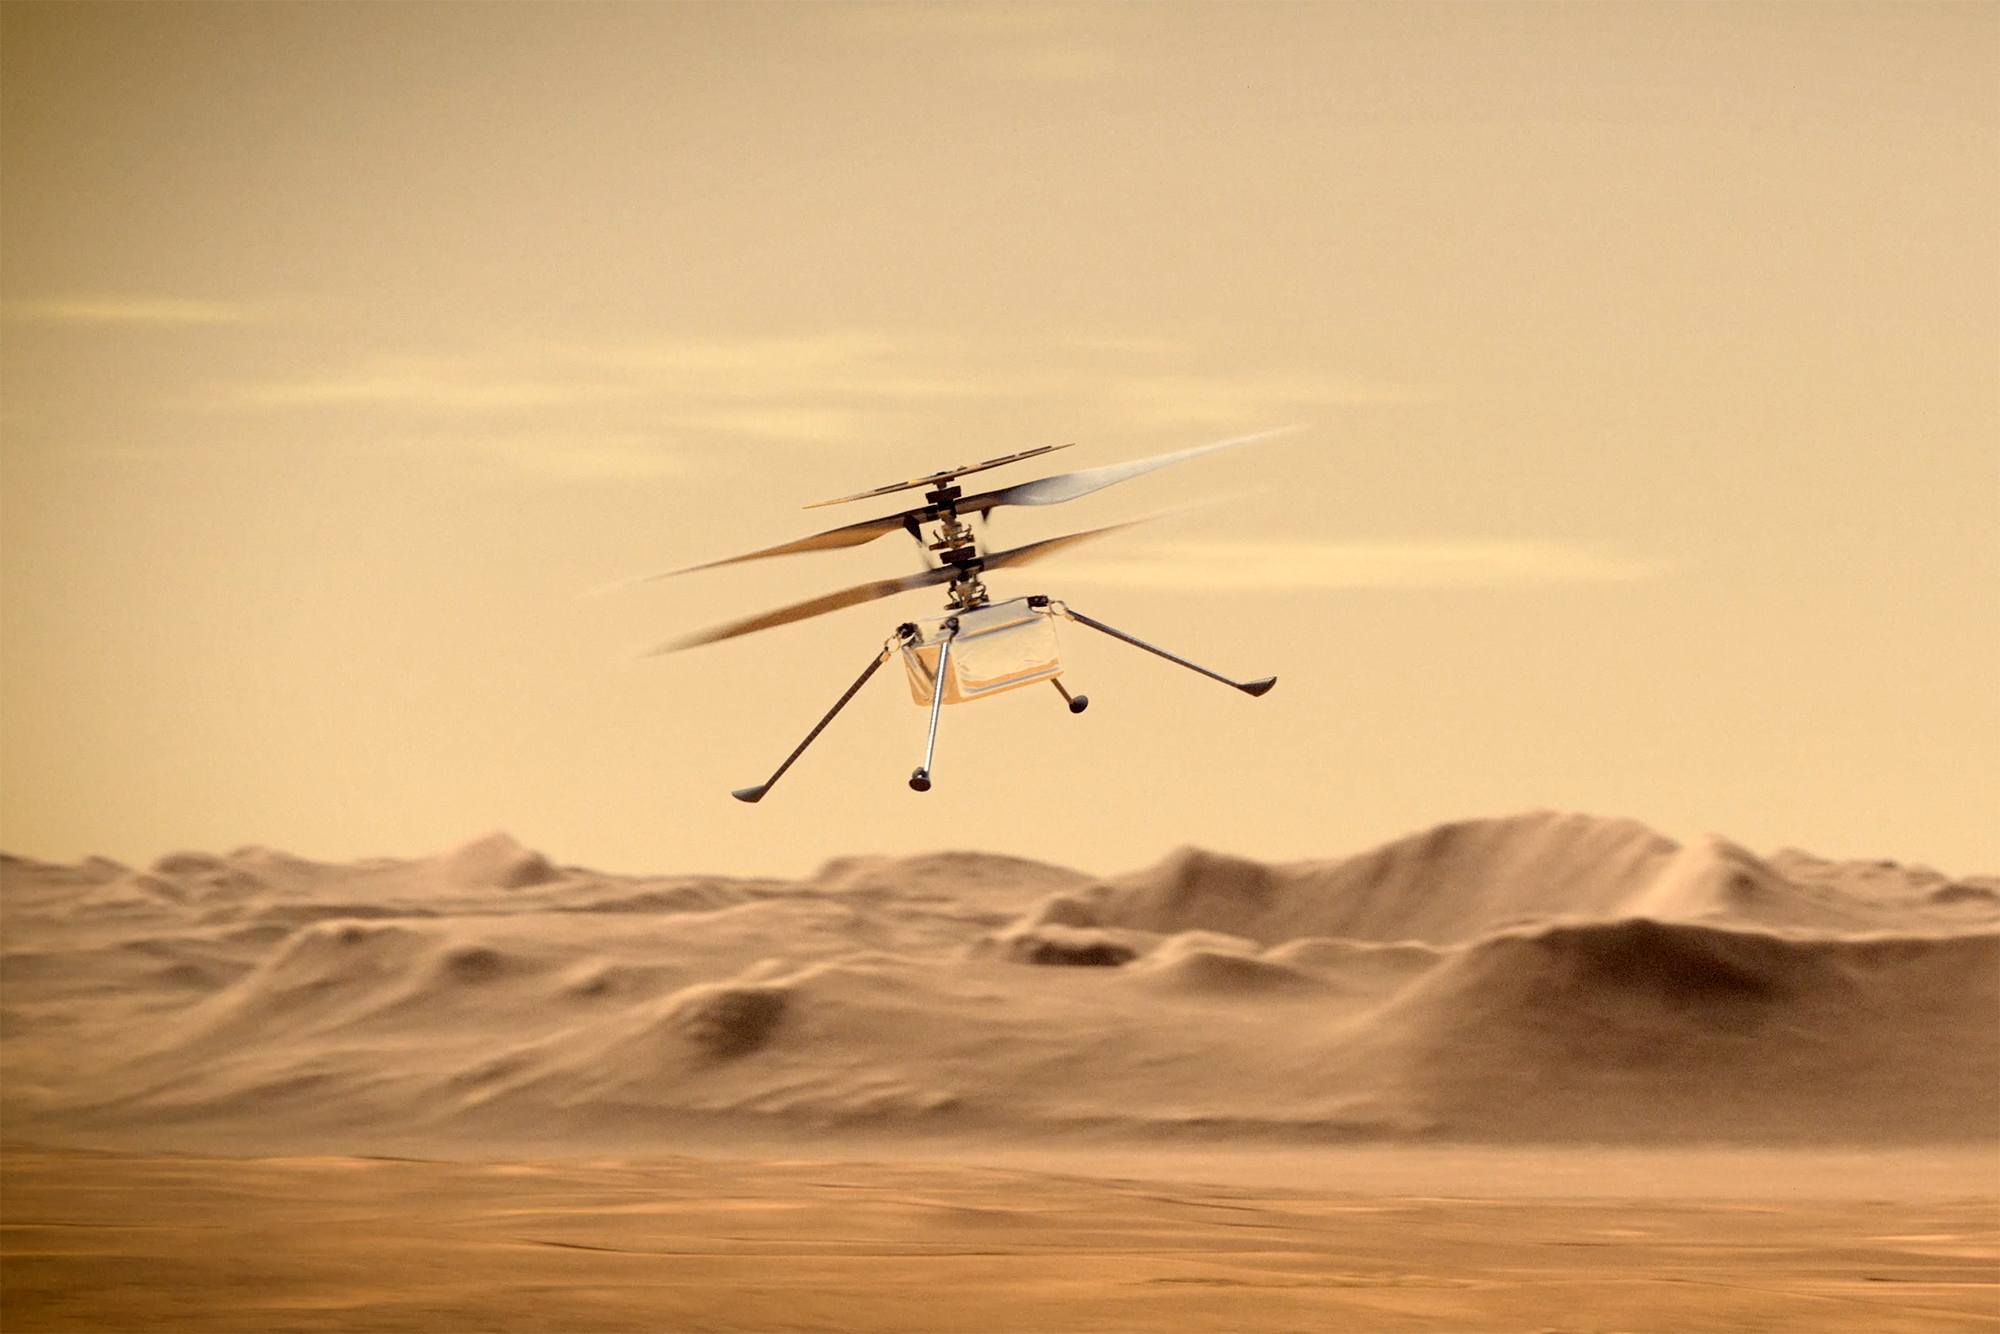 NASA’s Mars helicopter takes longest flight since lengthy
layoff